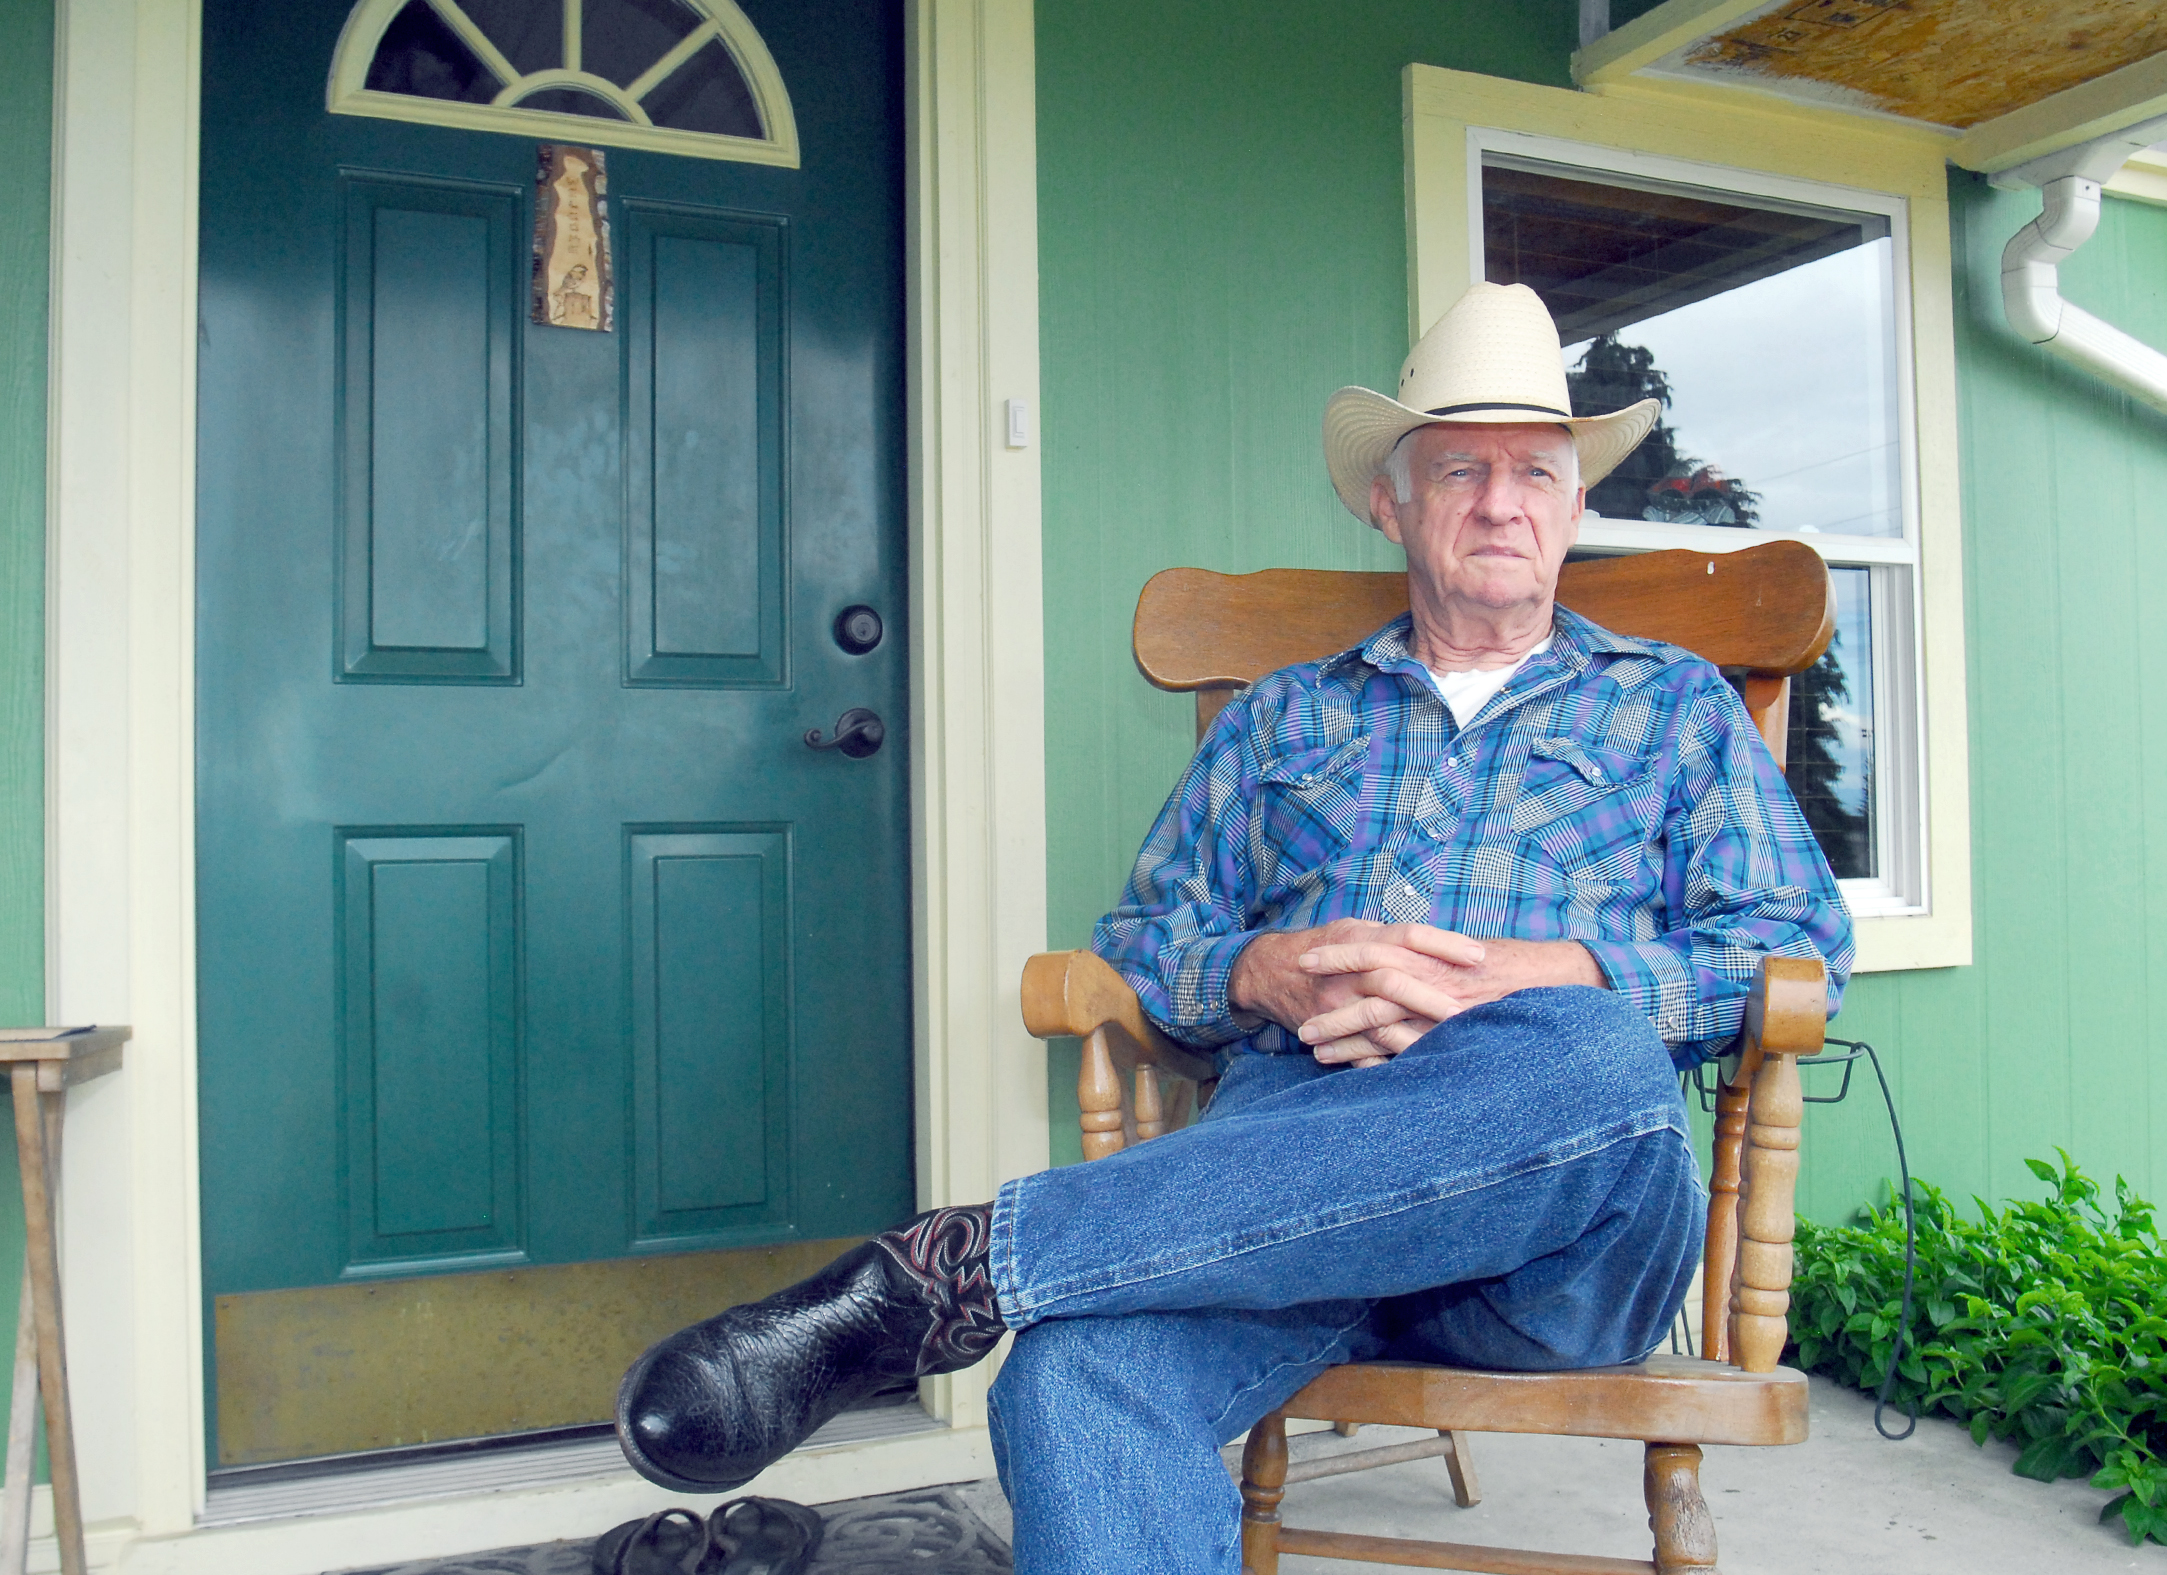 Charles W. Binney sits on the front porch of his Port Angeles home where he said he was assaulted by a man who tried to enter his house in April. Keith Thorpe/Peninsula Daily News